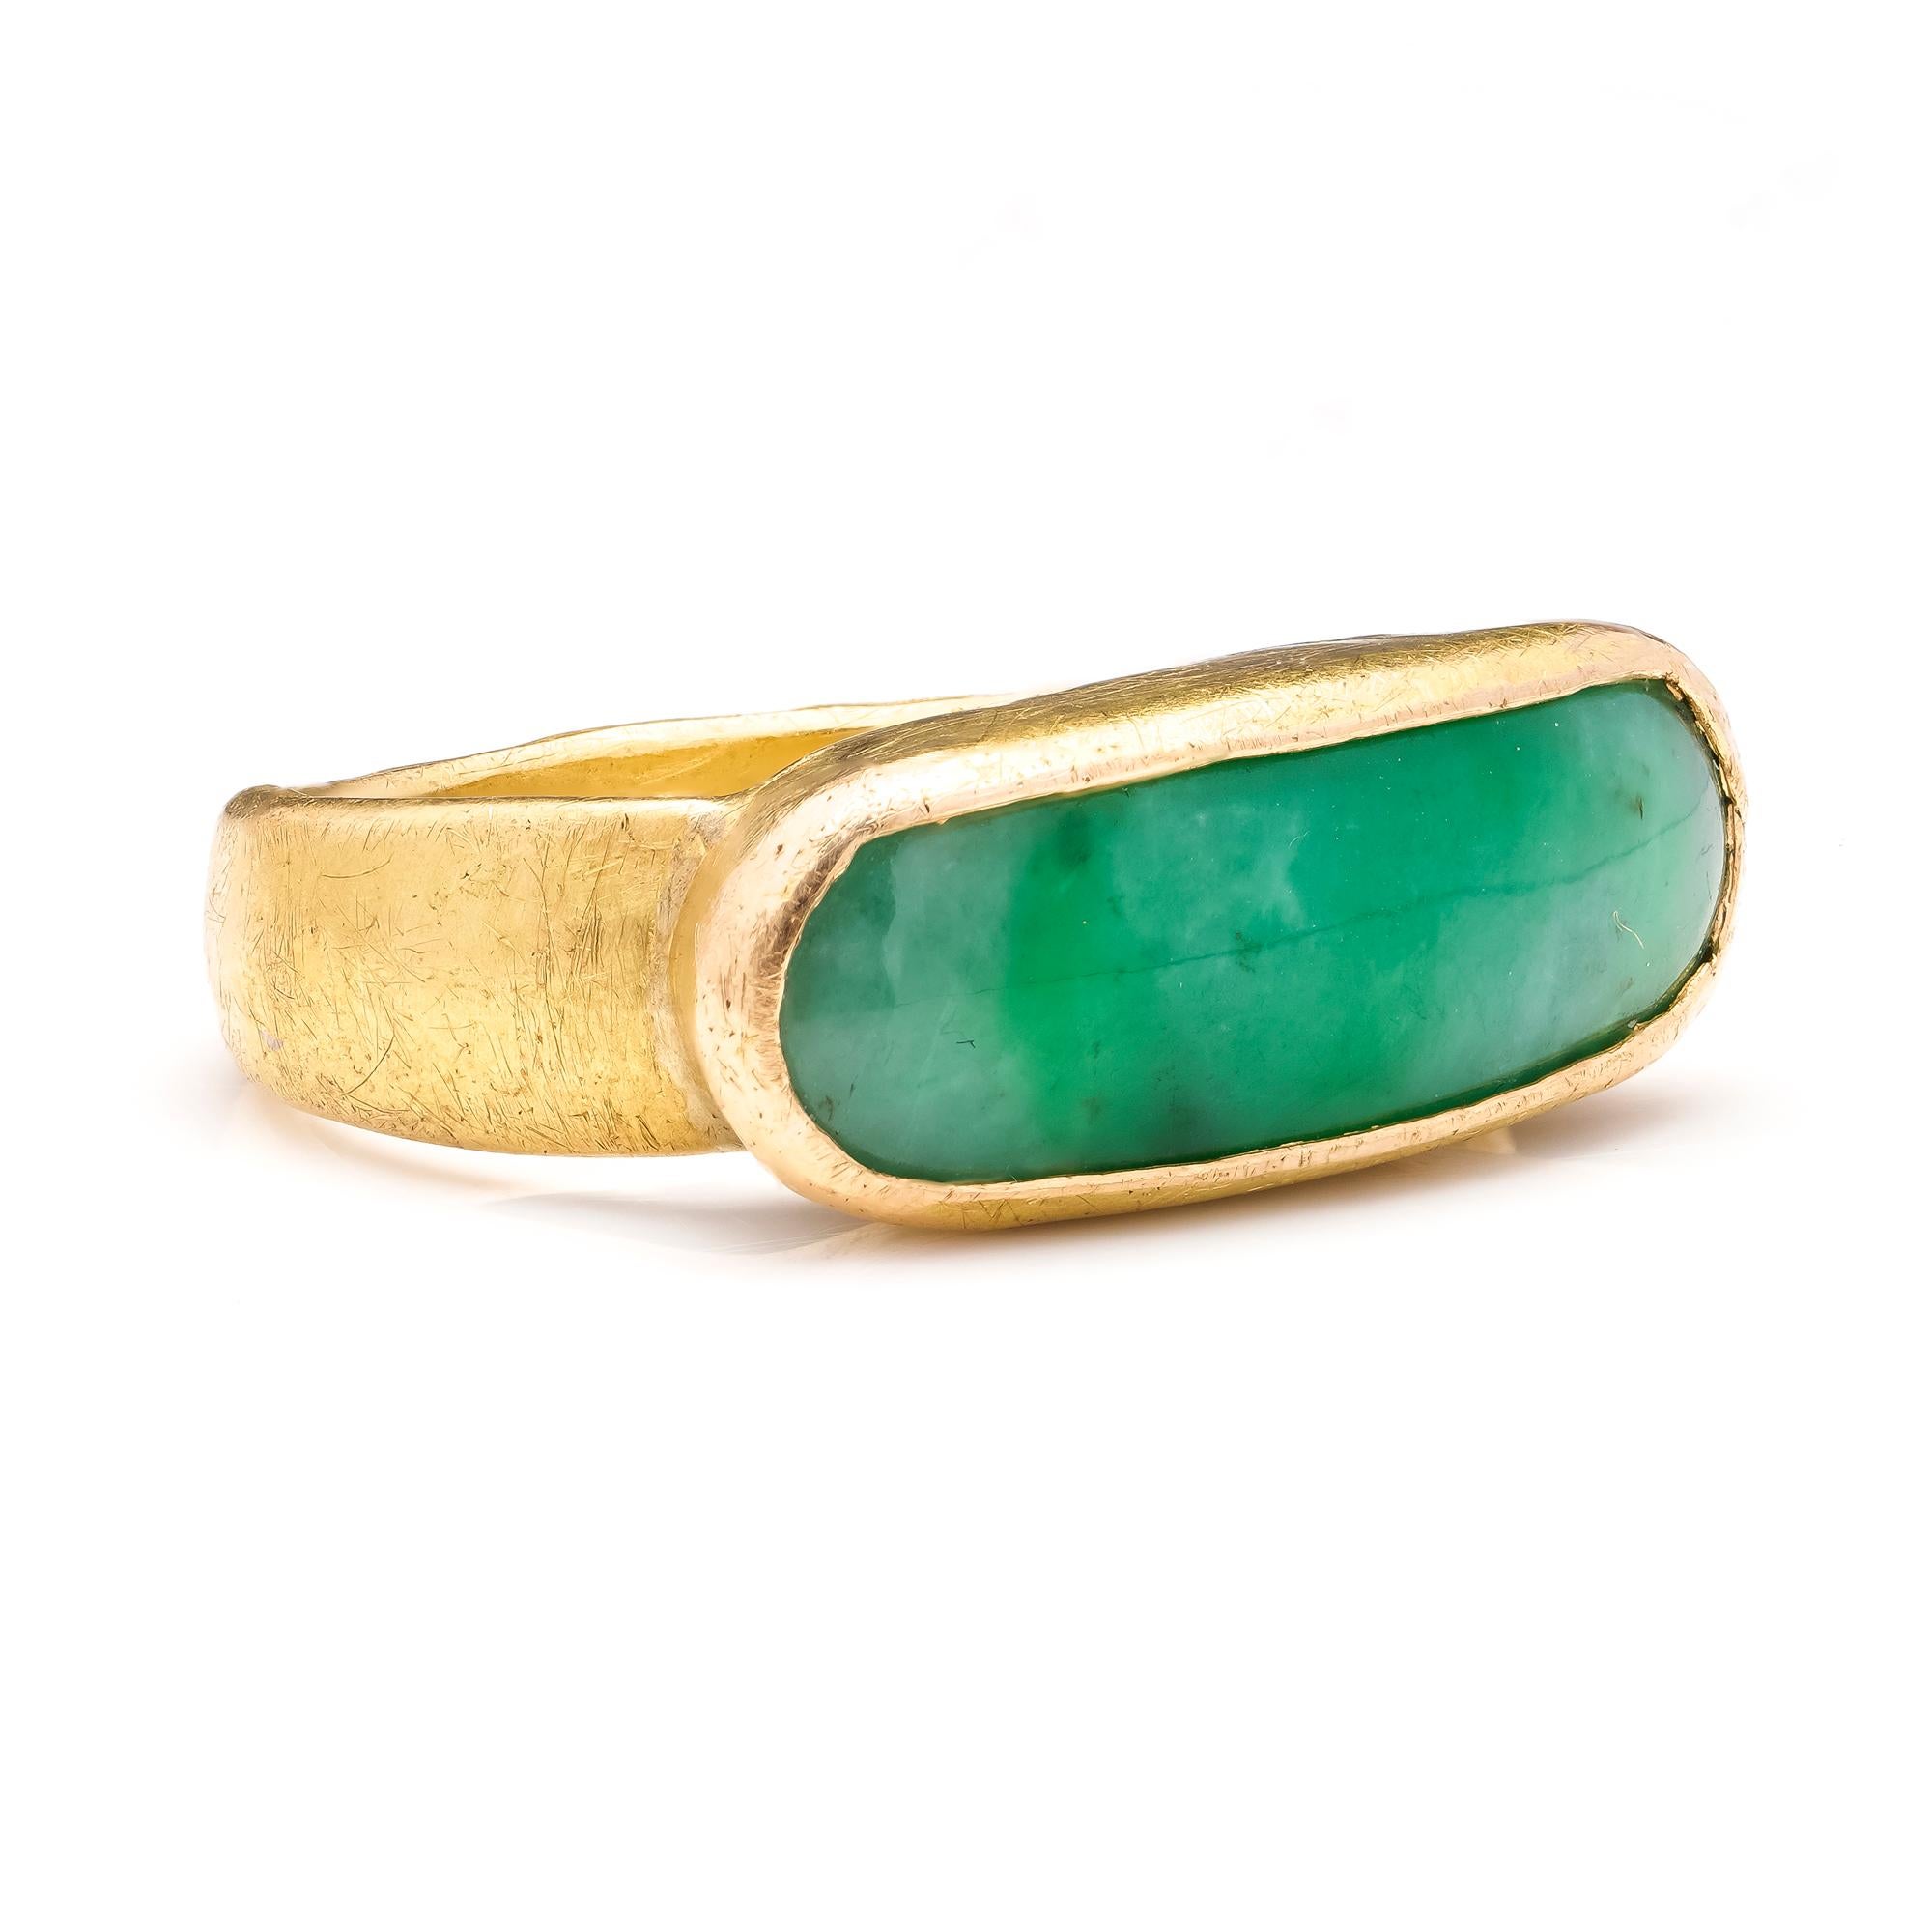 Vintage 21kt. gold men’s ring with elongated jade.
Tested positive for 21kt. gold.

Finger Size (UK) = N 1/2 (US) = 7 1/4 (EU) = 56
Ring size: 2.6 x 2.4 x 0.9 cm 
Weight: 11.00 grams

Condition: The ring is pre-owned, minor signs of usage, good and